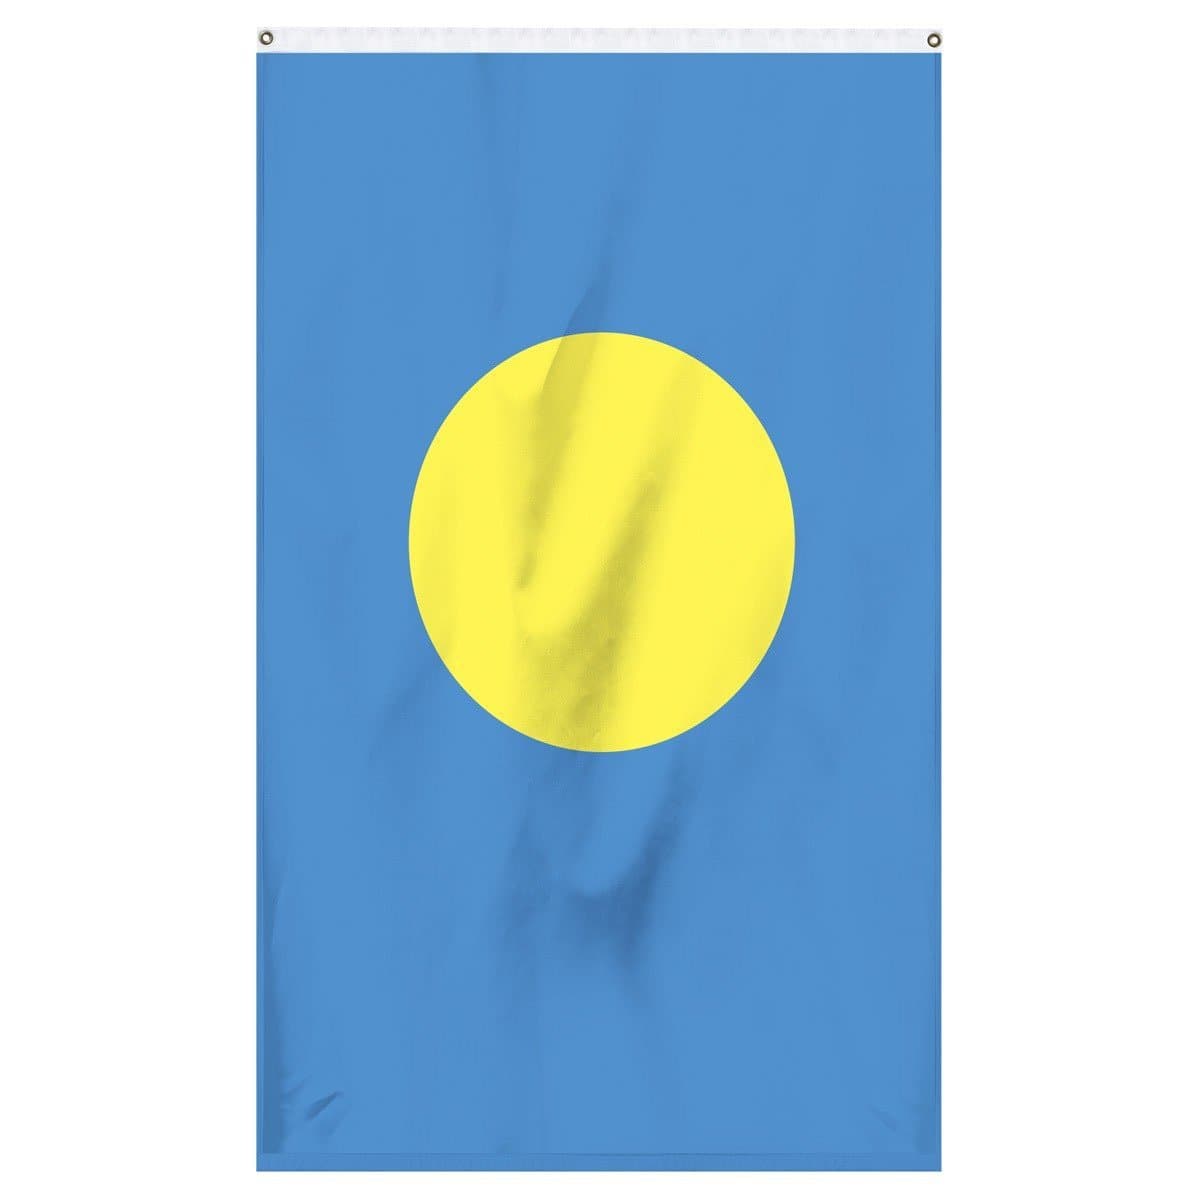 Palau National flag for sale to buy online